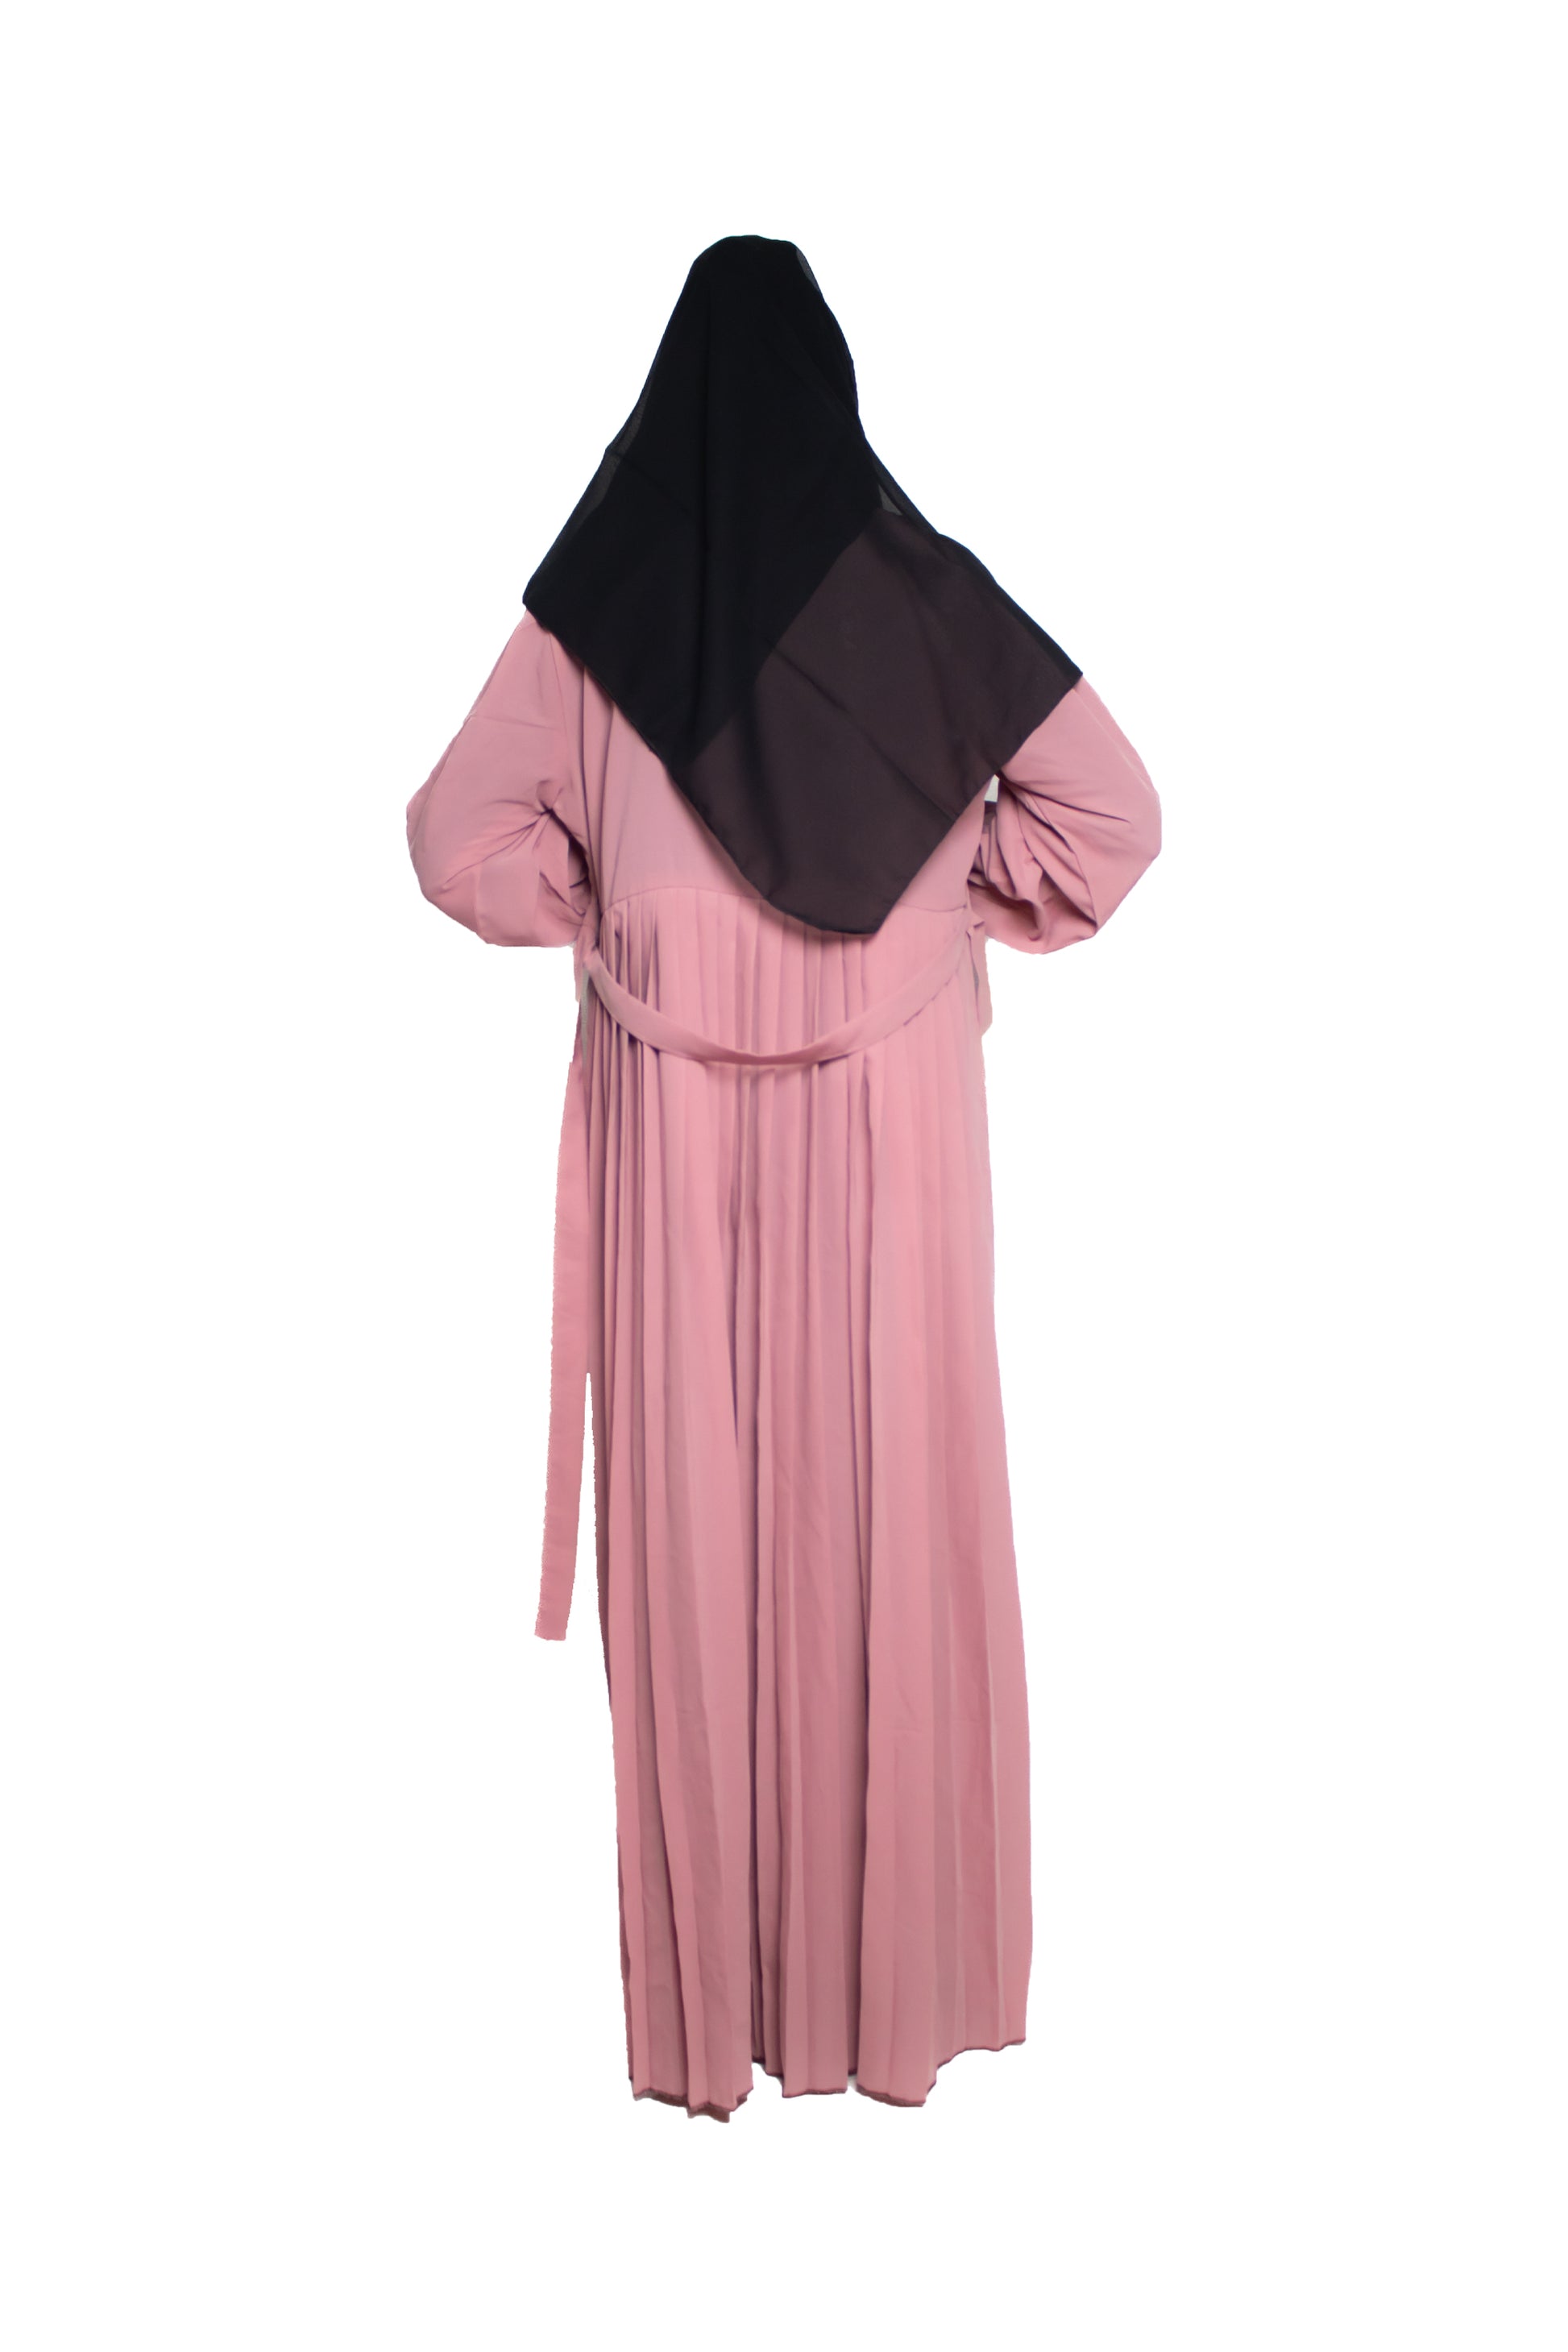 Modest City Self Design Light Pink Button With Plate Abaya or Burqa With Hijab for Women & Girls-Series Laiba